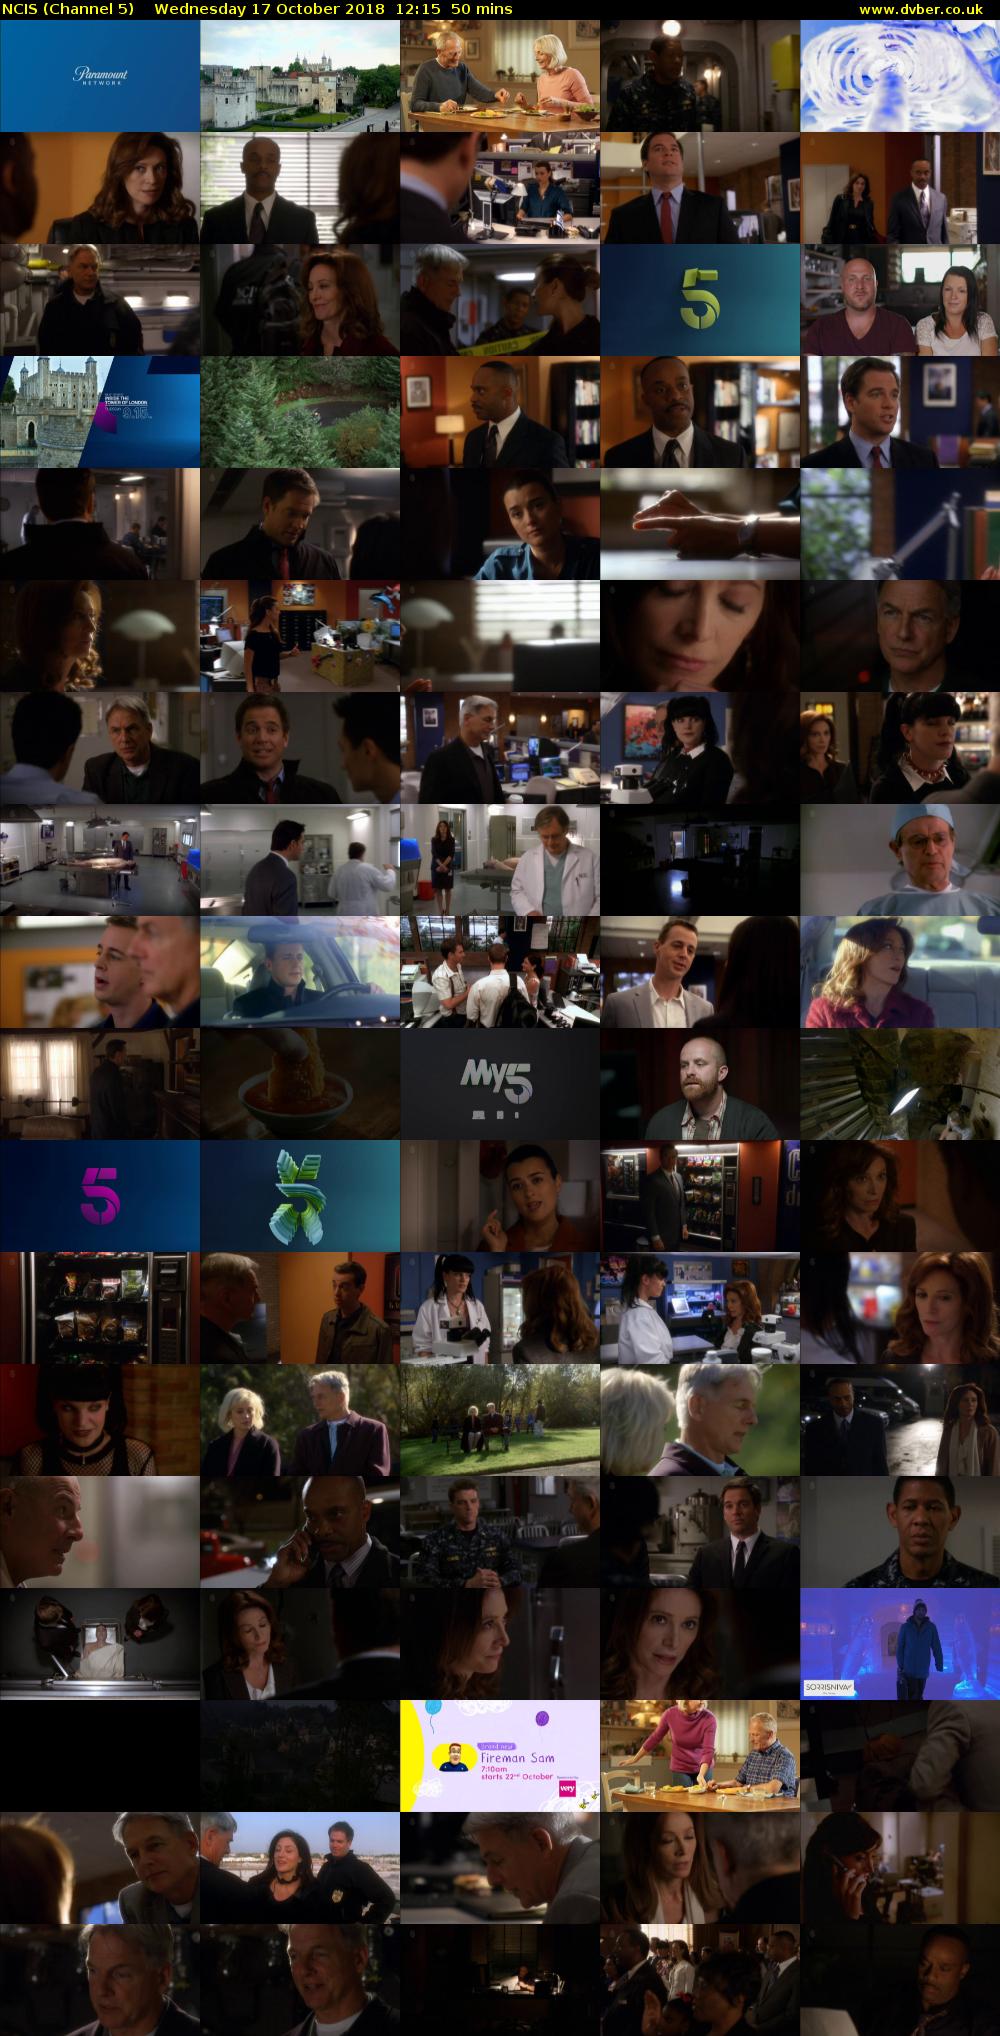 NCIS (Channel 5) Wednesday 17 October 2018 12:15 - 13:05